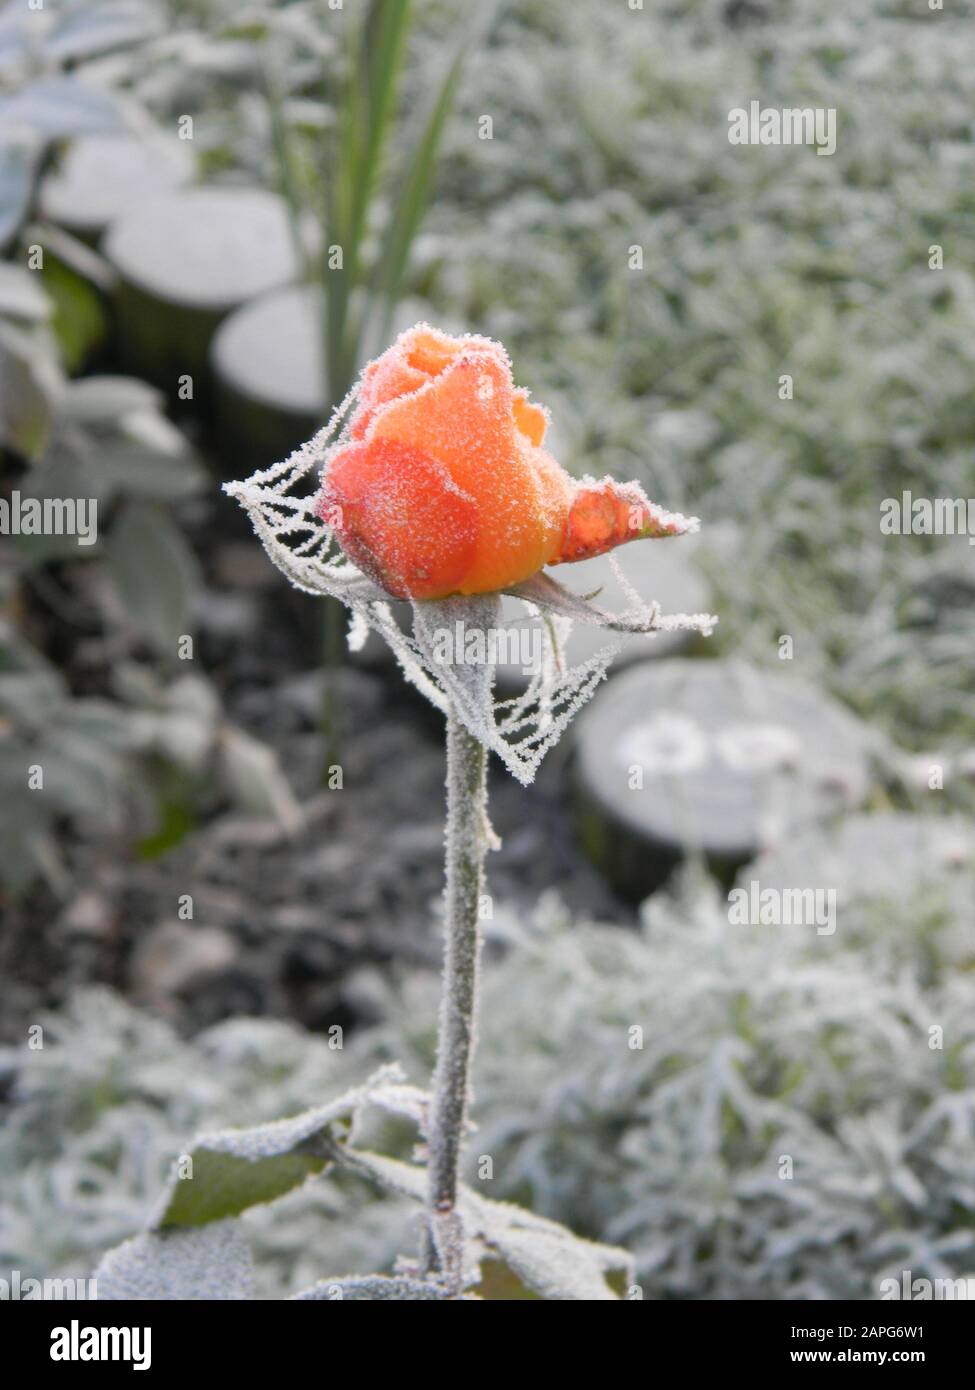 Close up of frozen rosebud, covered in frost, frozen cob web, frozen foliage, frozen lawn, garden poles in the background Stock Photo